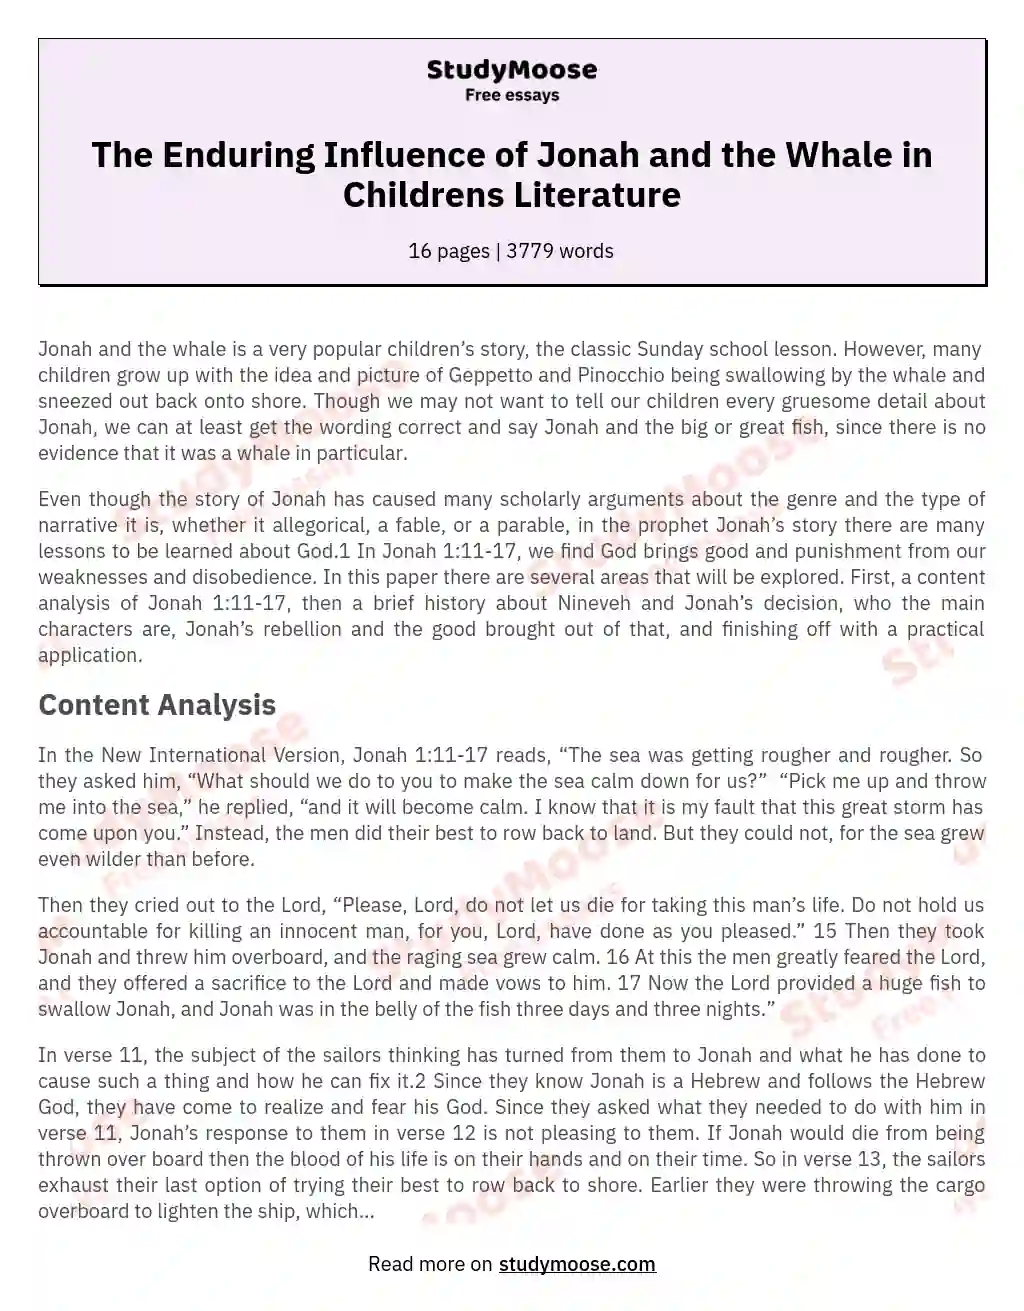 The Enduring Influence of Jonah and the Whale in Childrens Literature essay